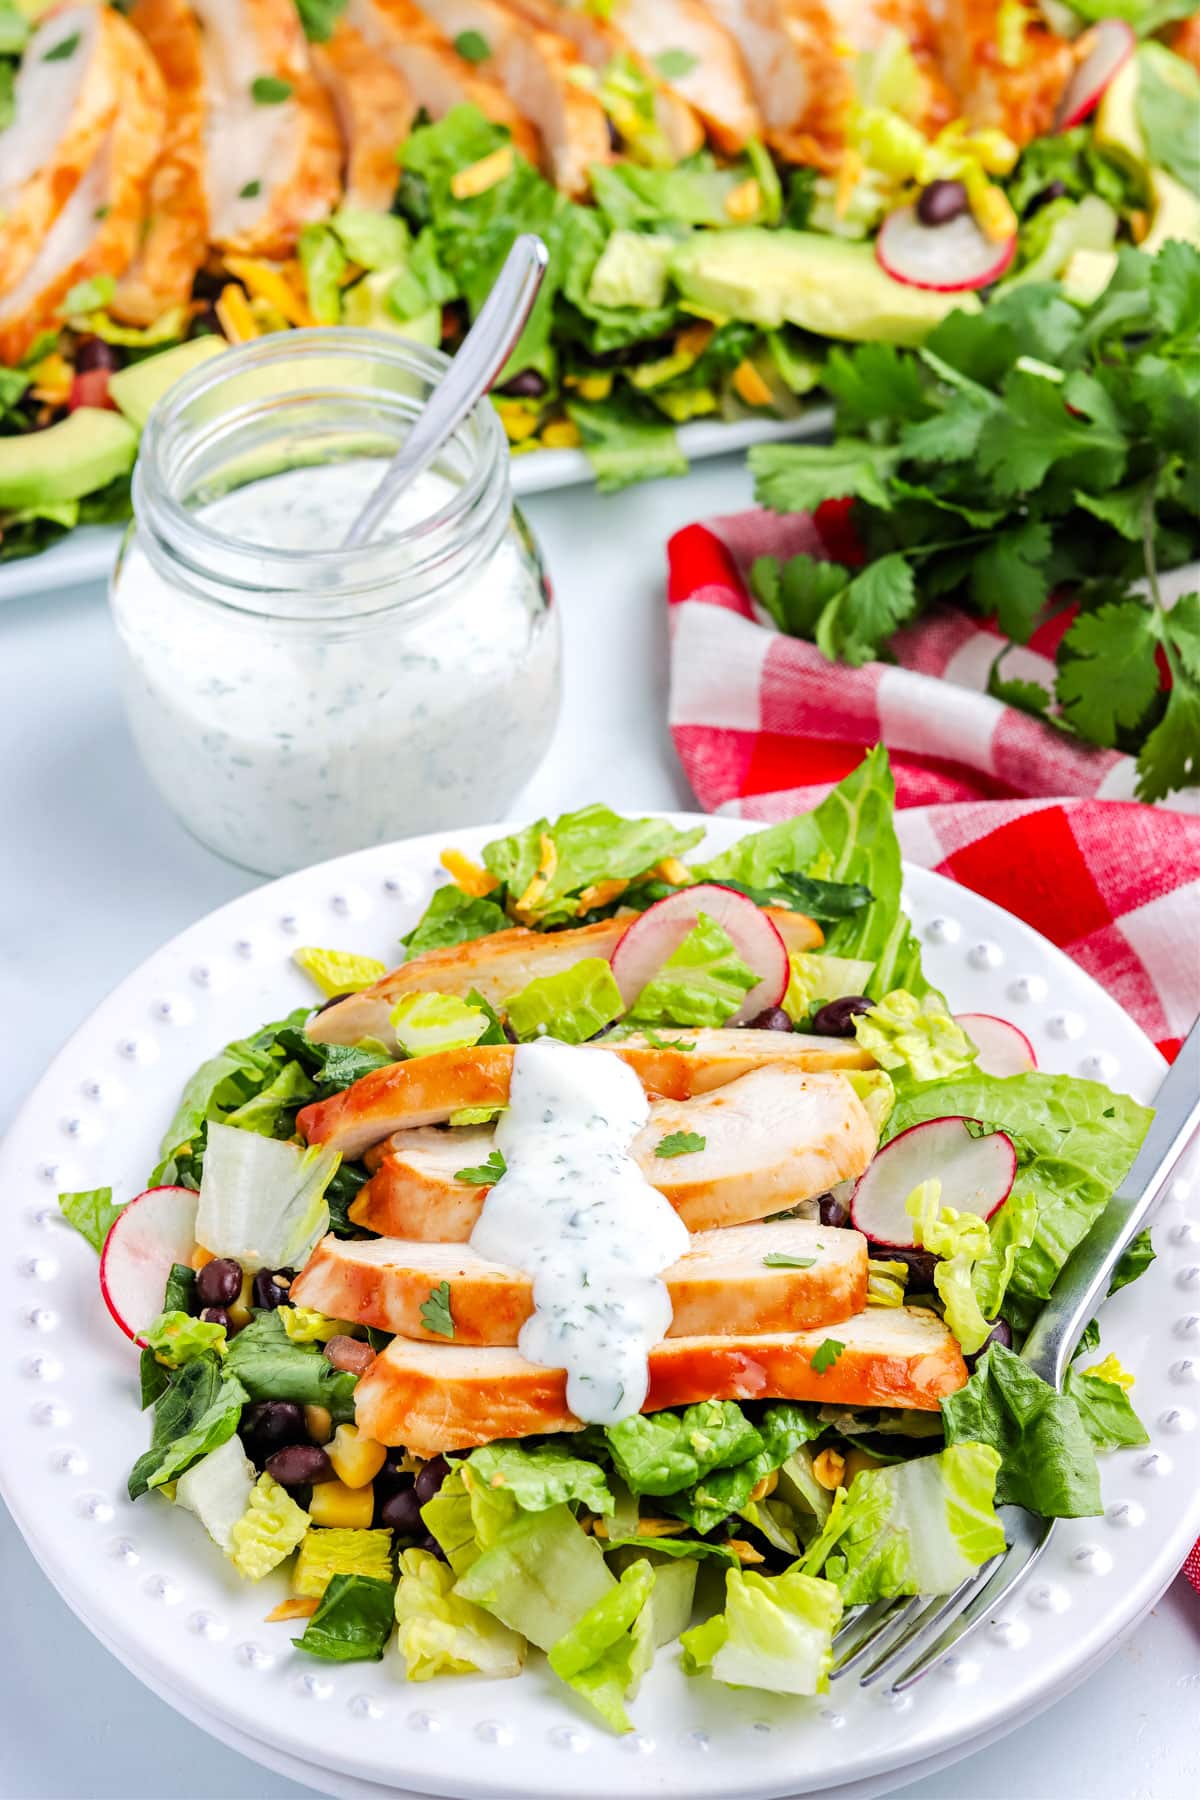 A picture of the salad on a plate with a jar of dressing in the background.